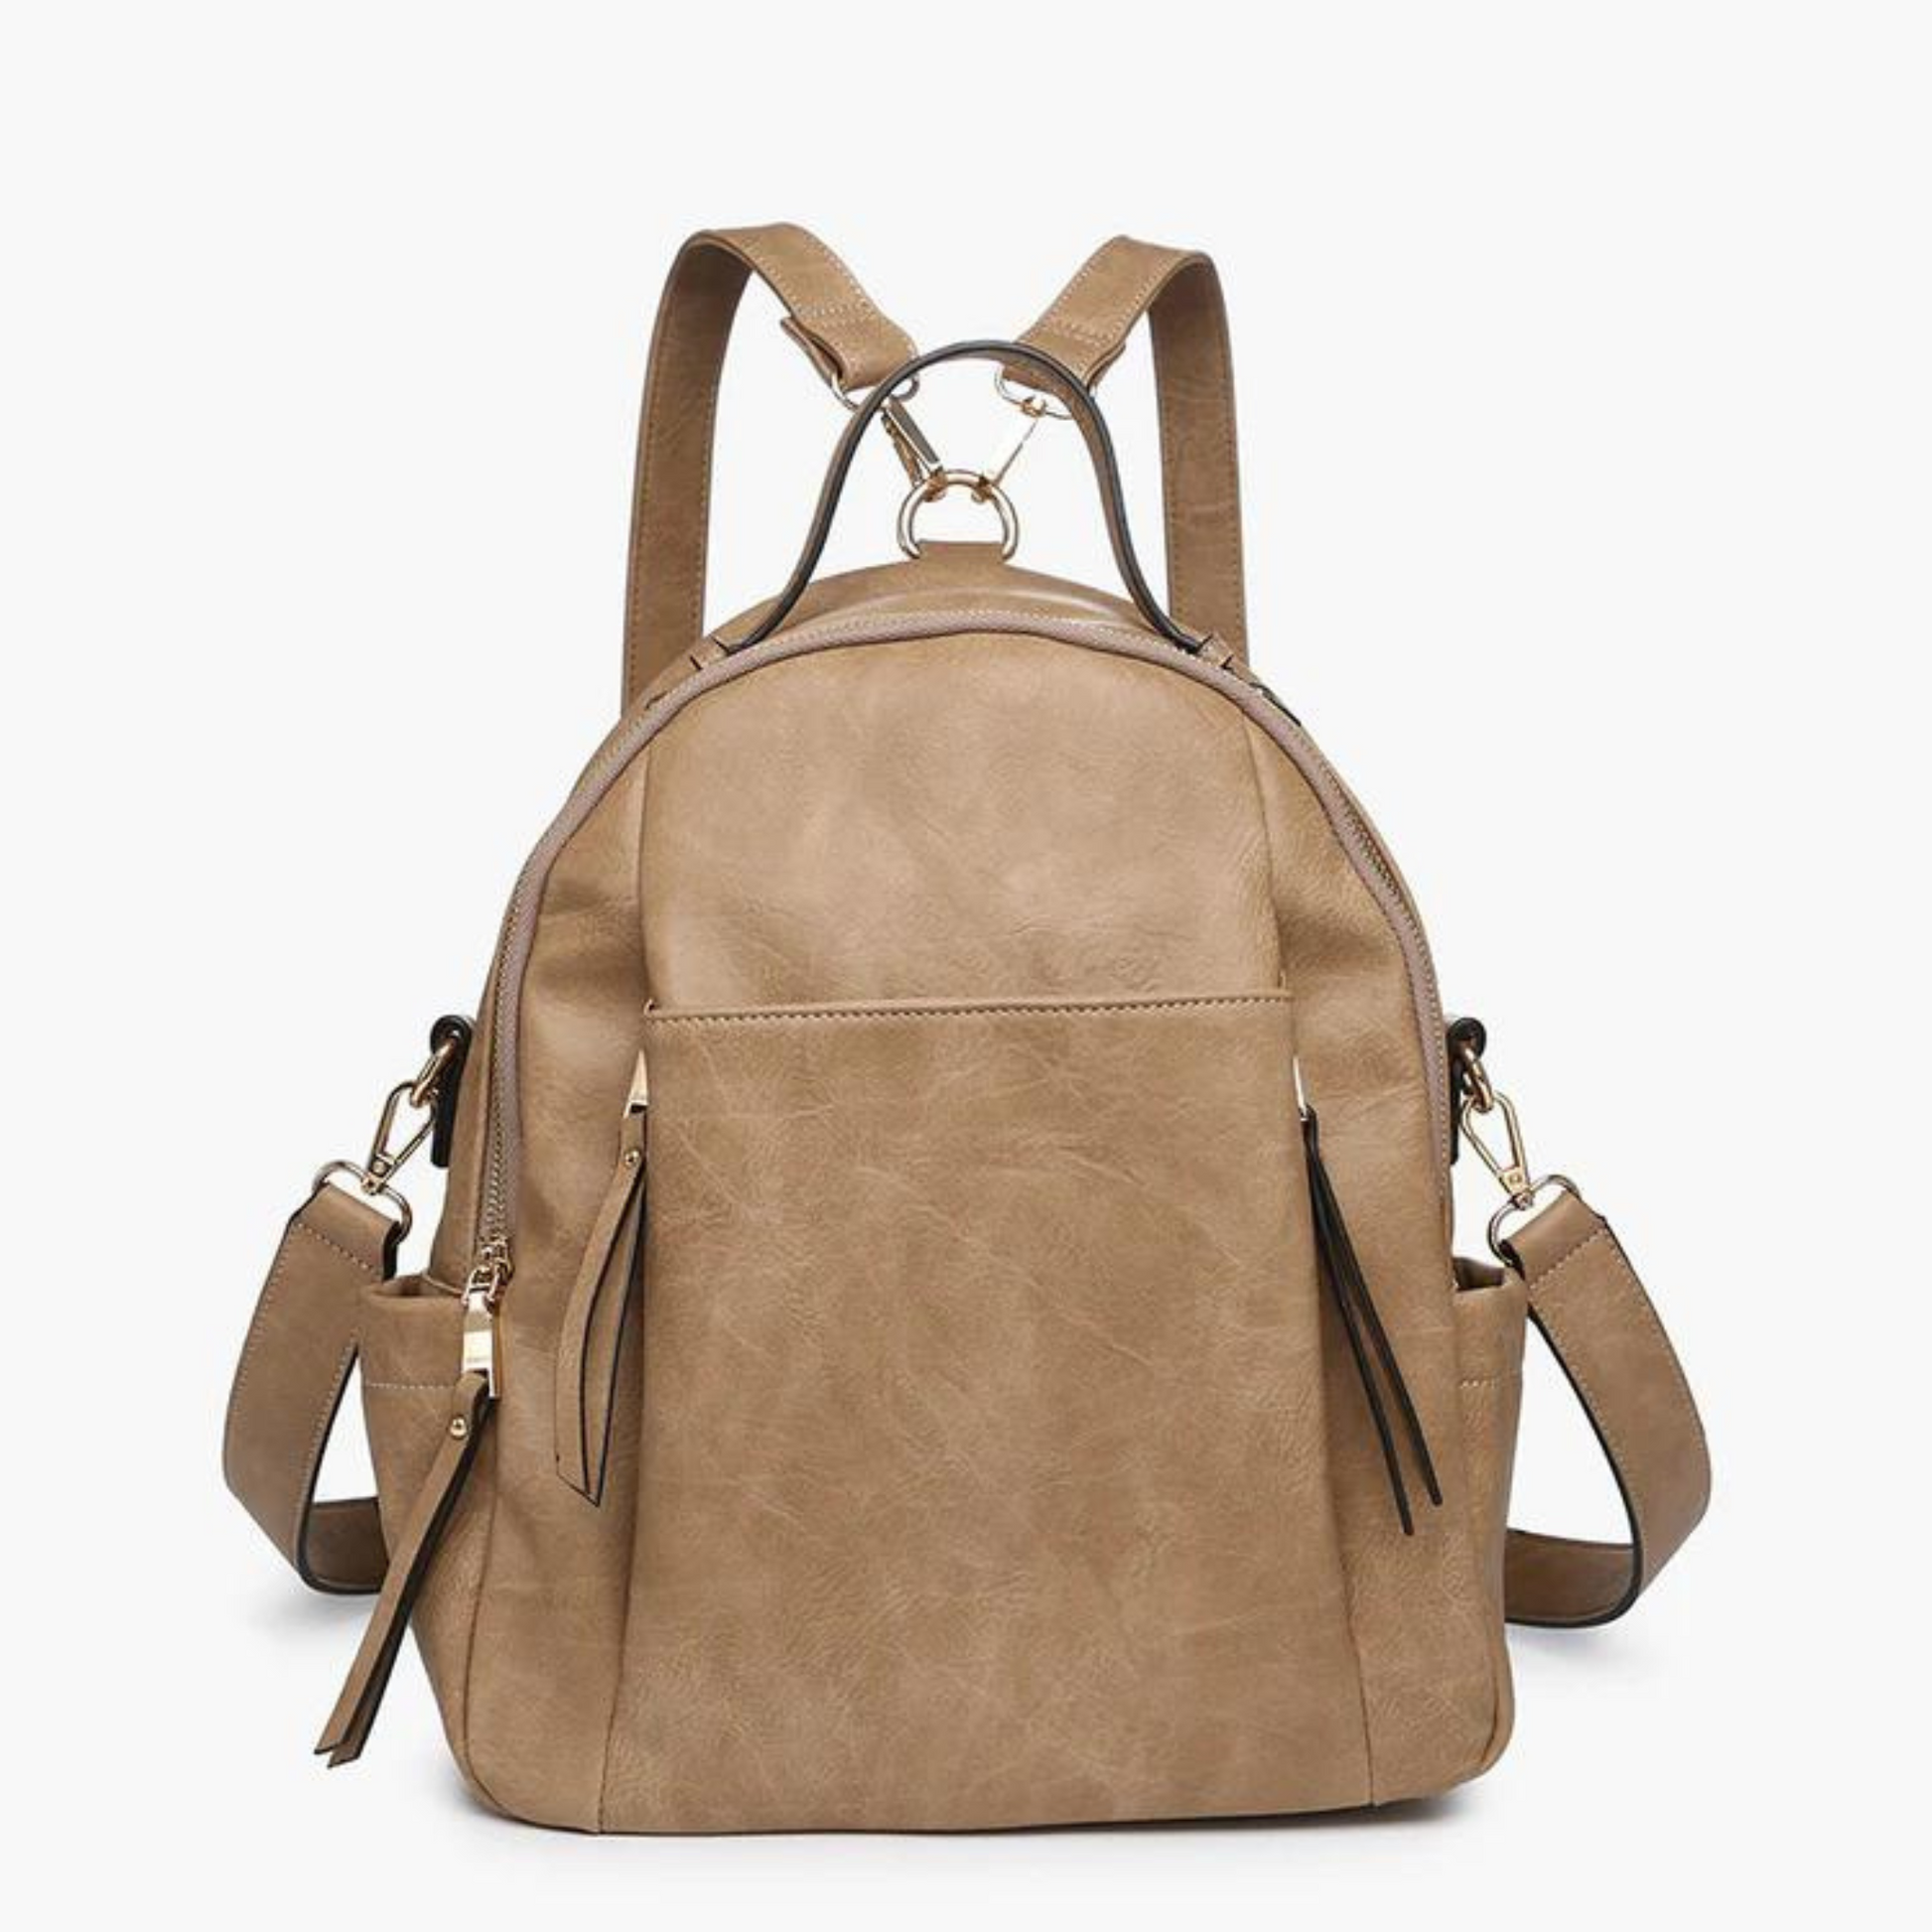 Taupe color Lillia backpack